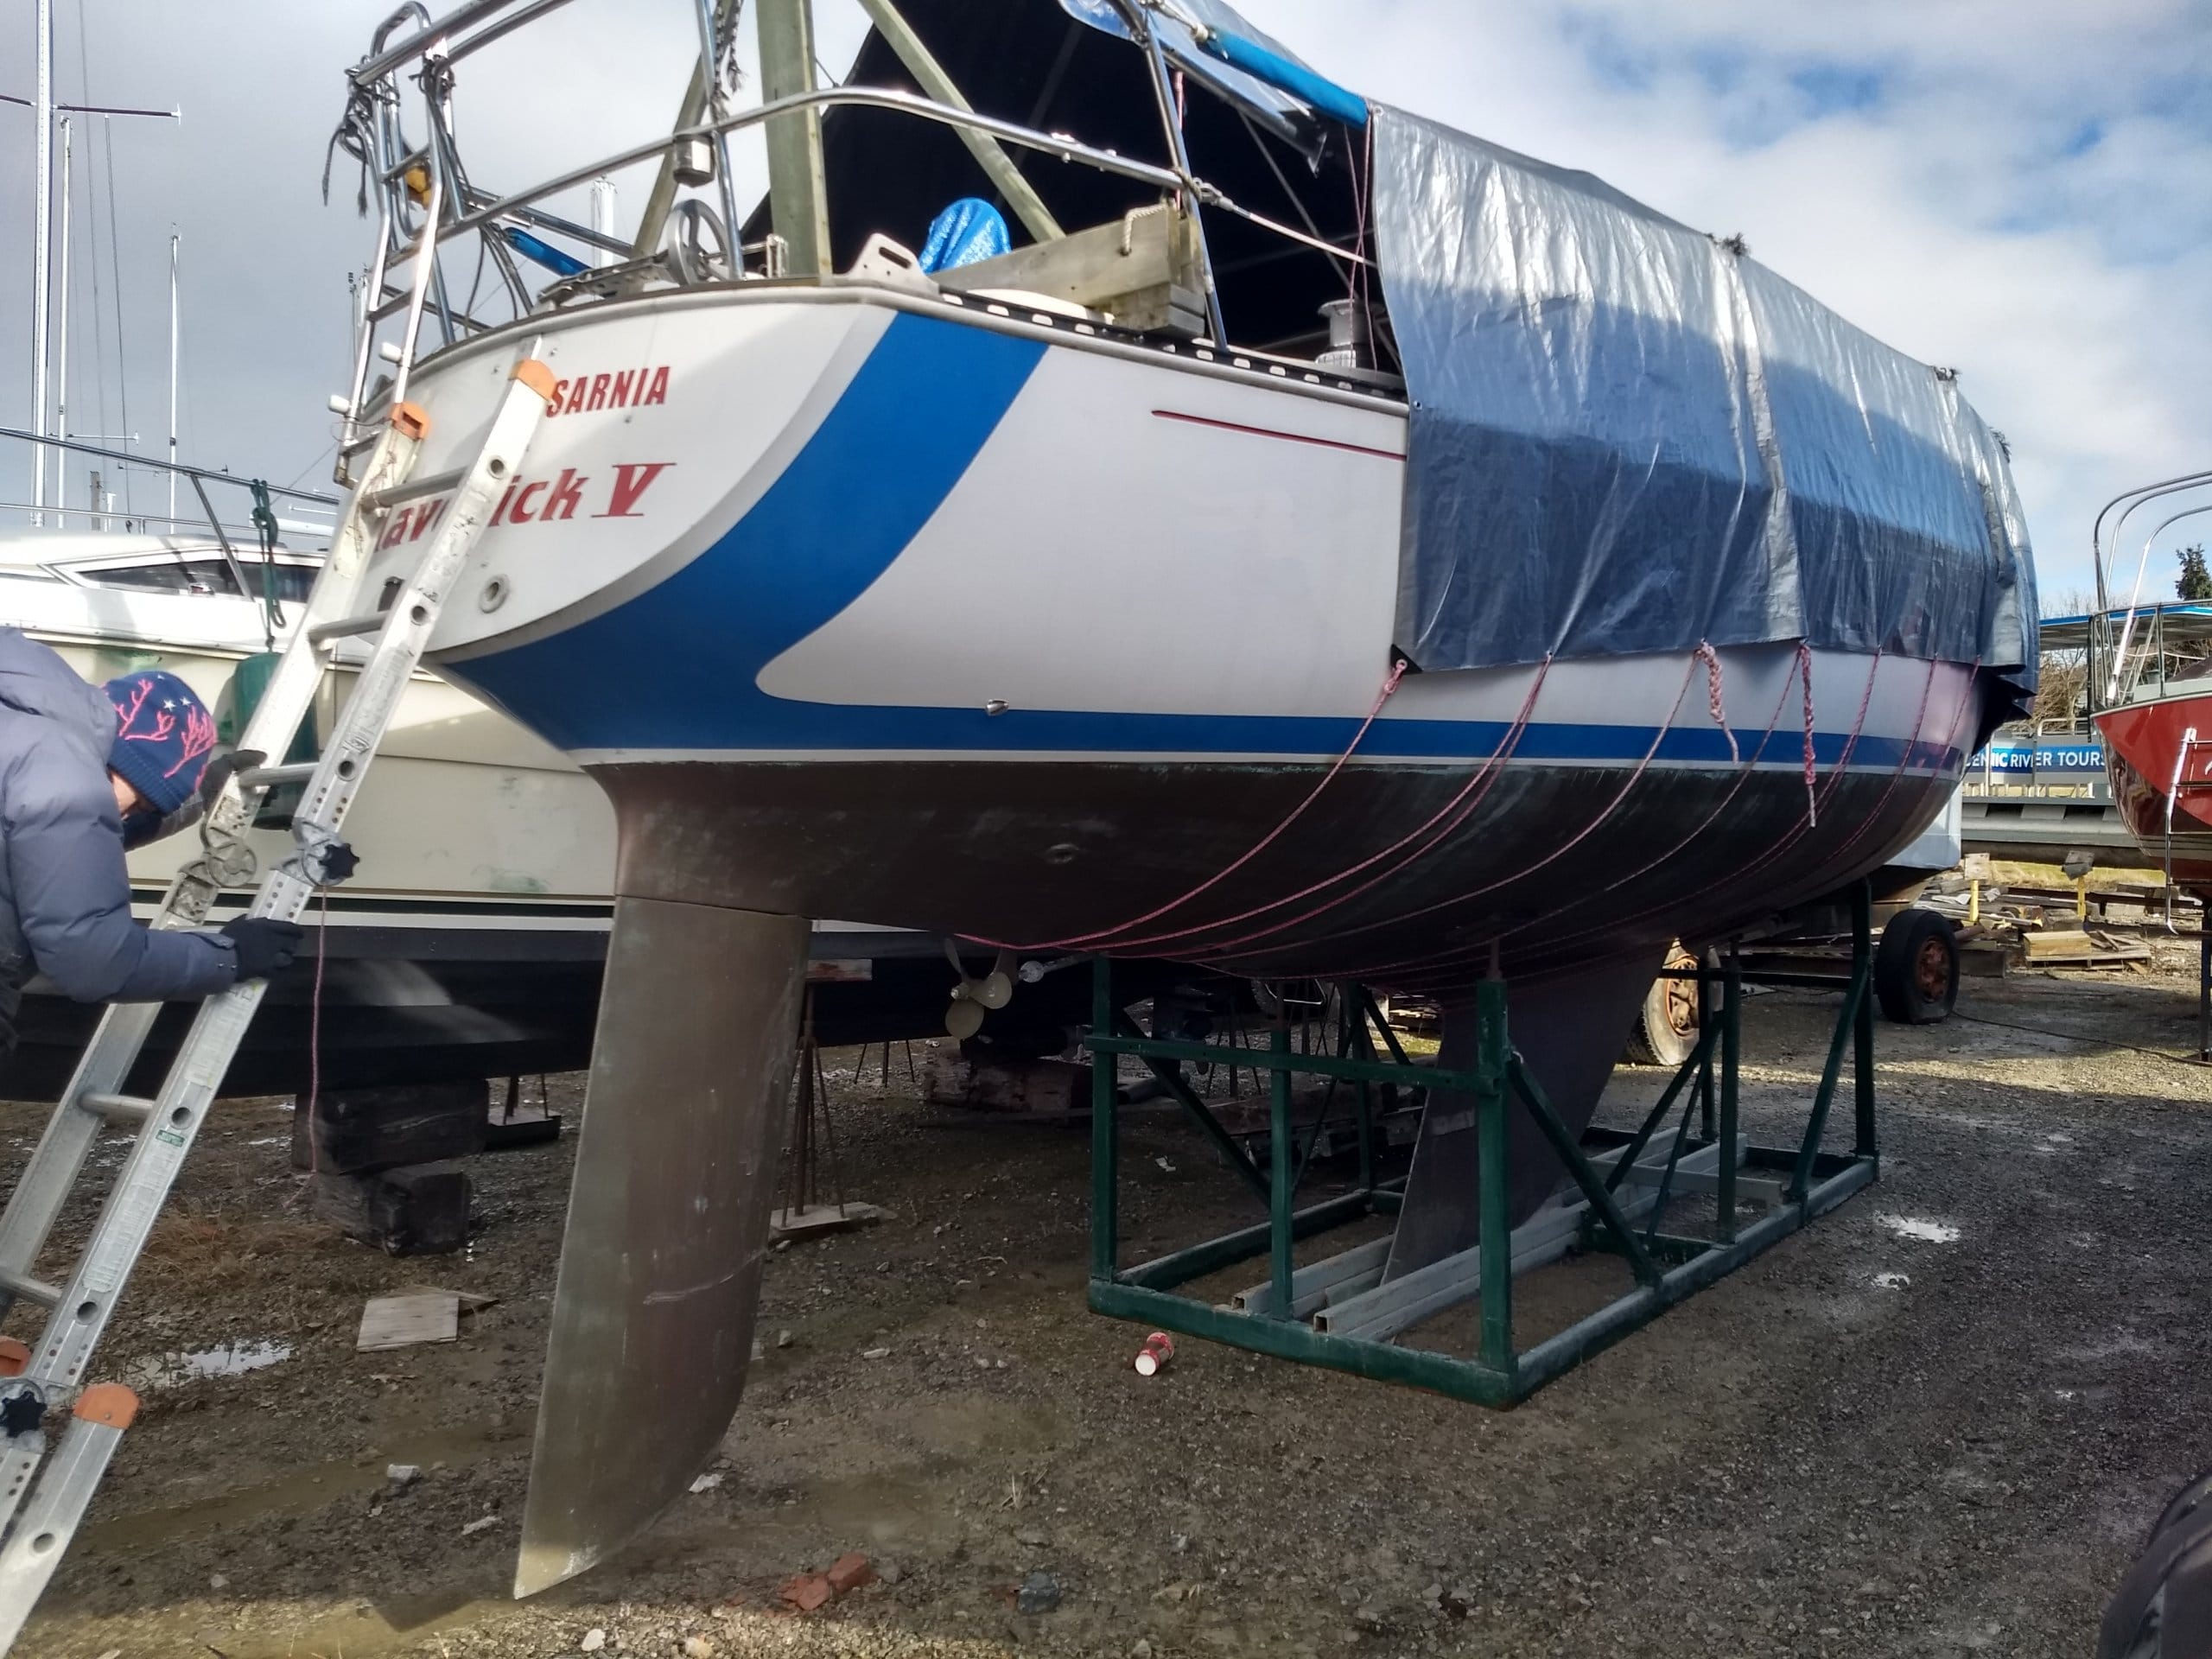 US$30,000 Starter Cruiser—Part 2, The Boat We Bought - Attainable Adventure  Cruising